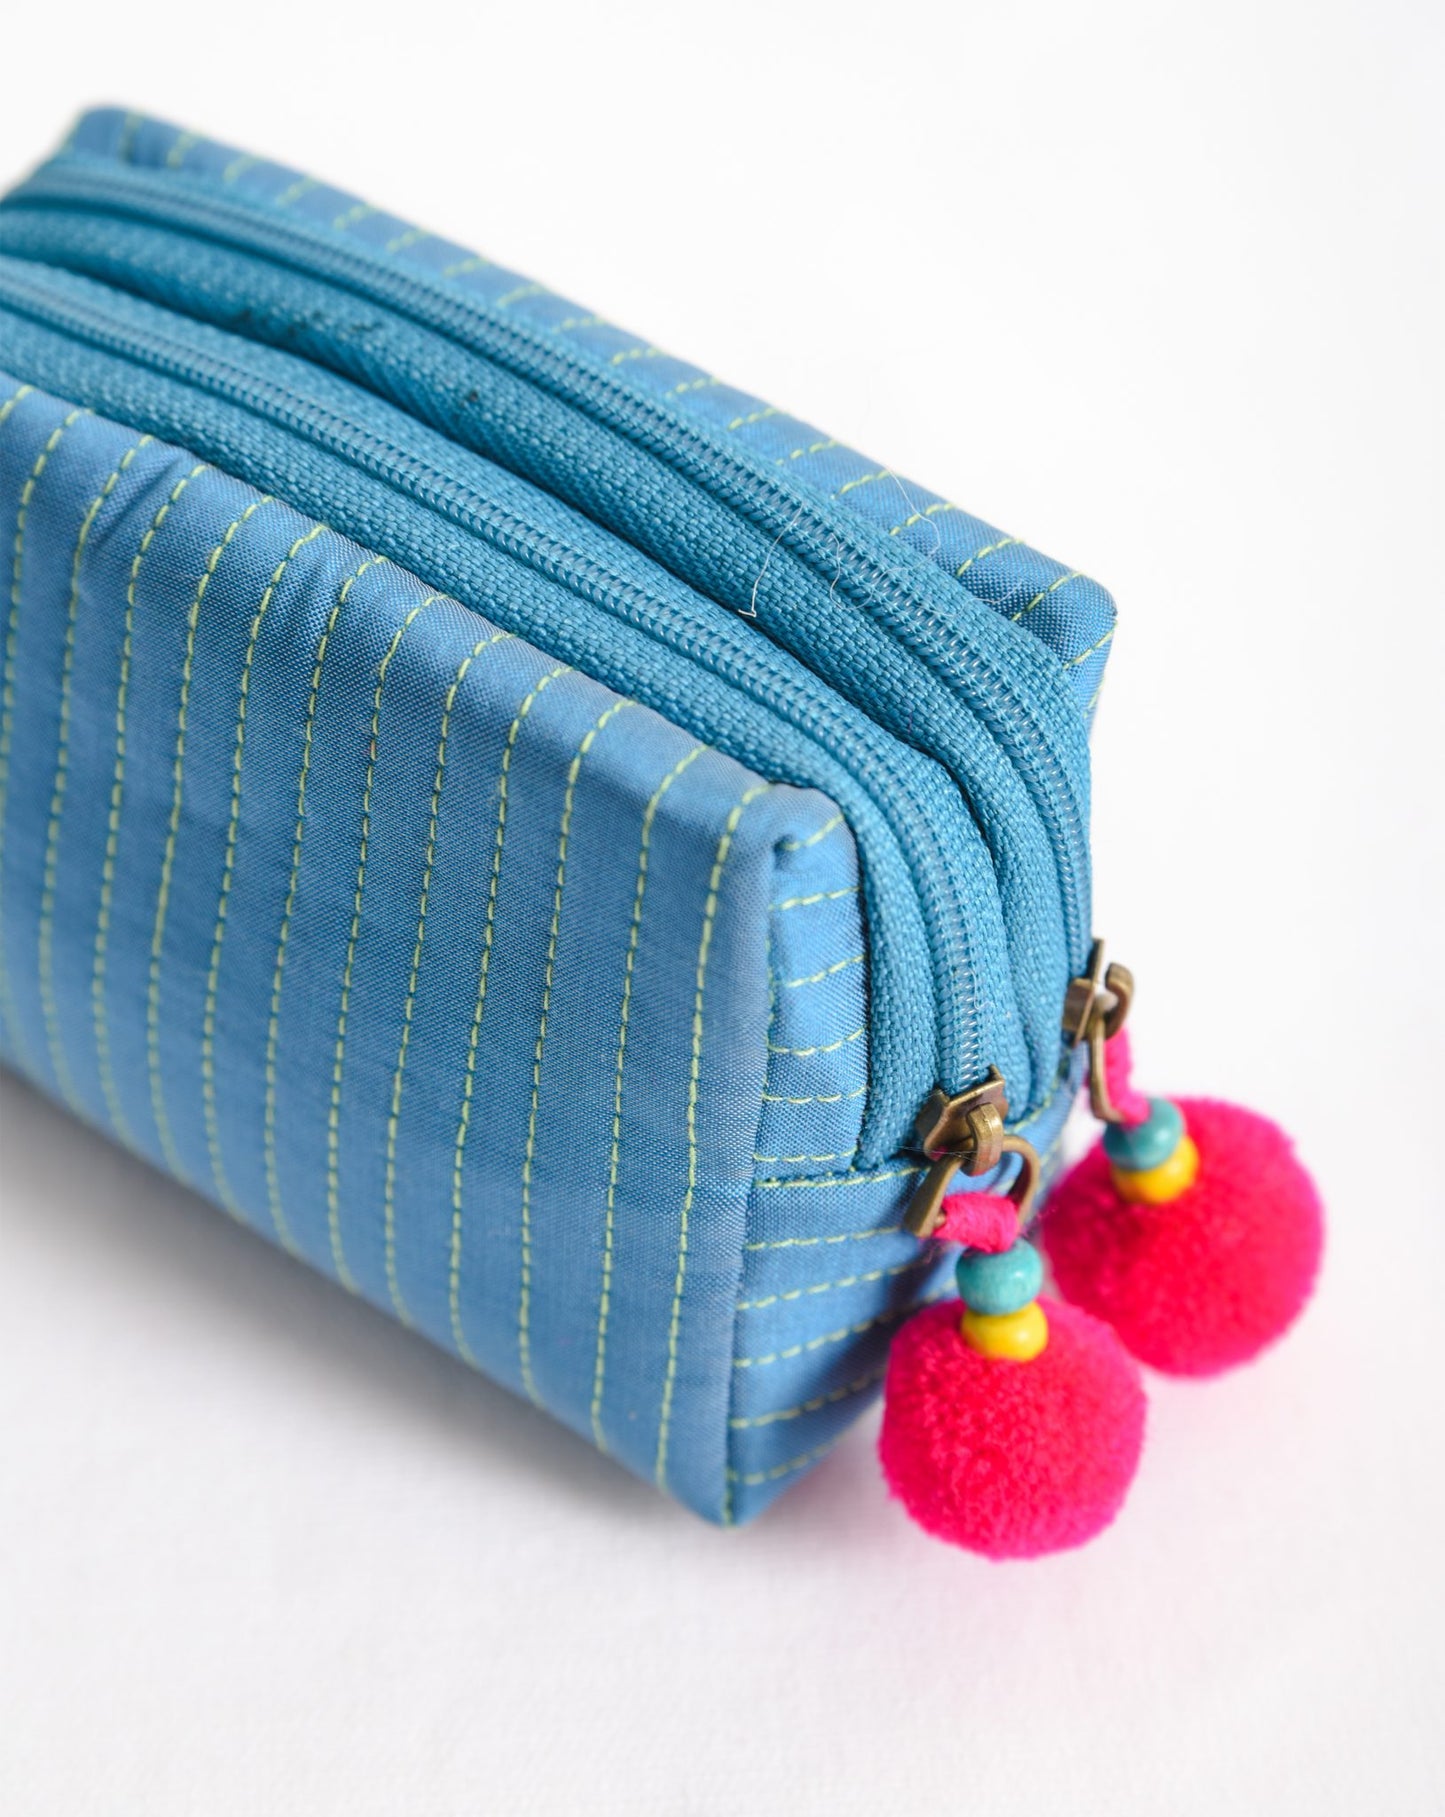 Small turquoise pouch - double pocket